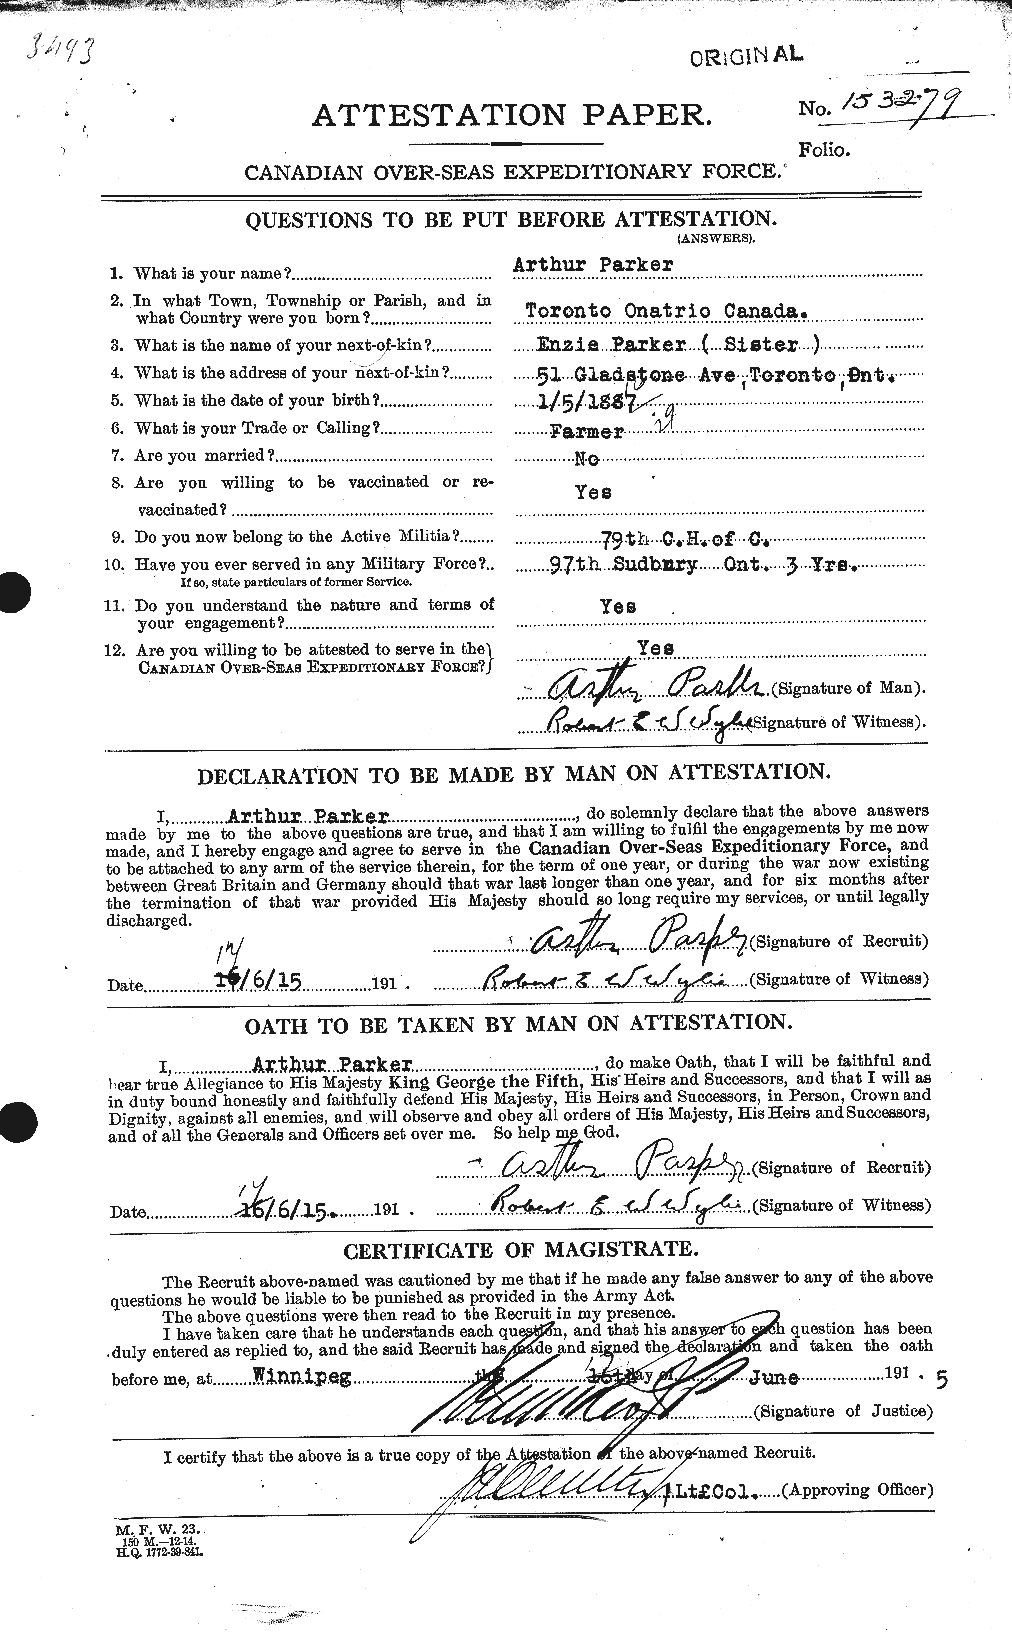 Personnel Records of the First World War - CEF 565011a